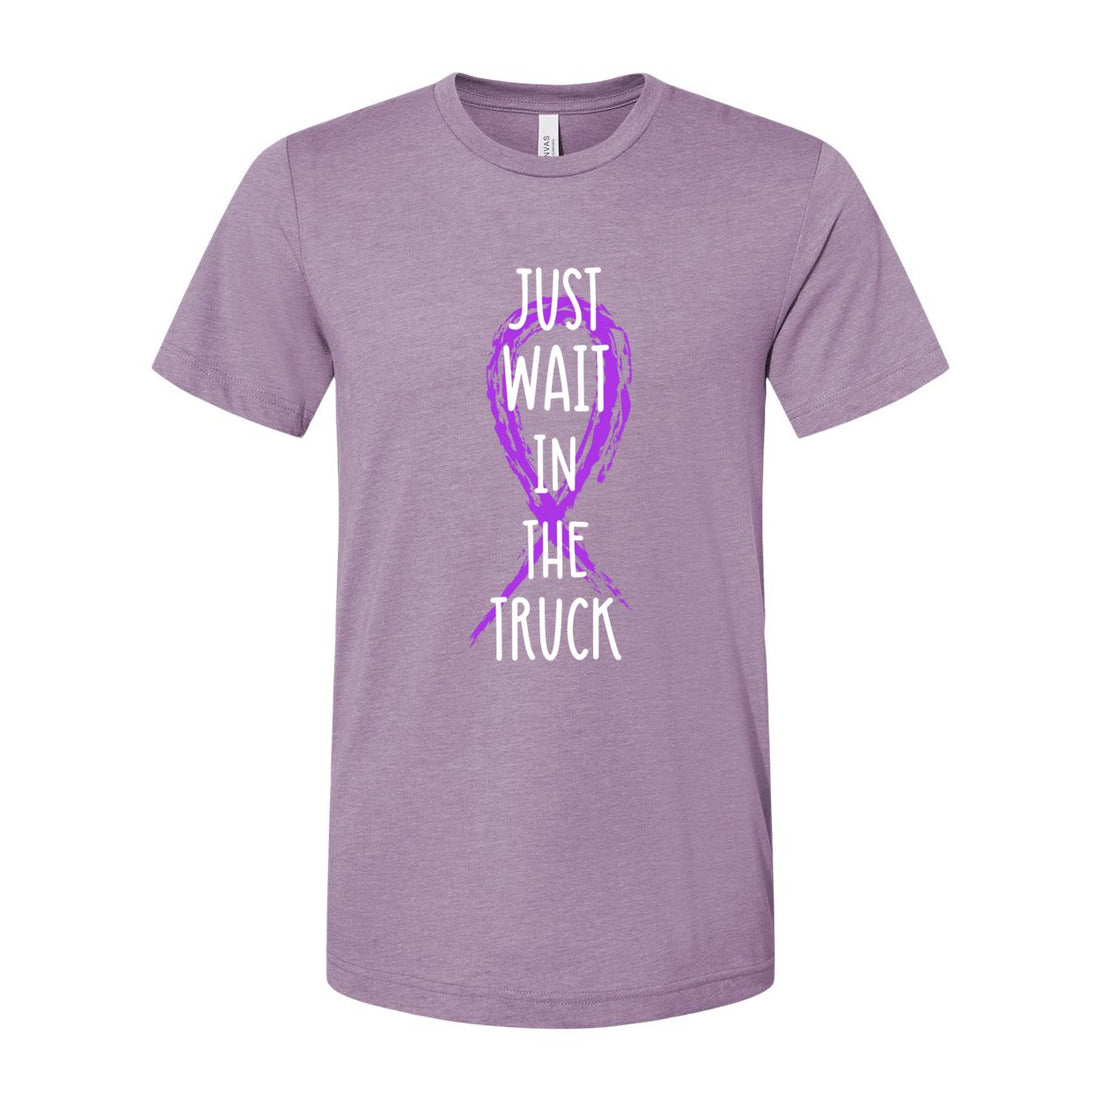 Stay In The Truck Short Sleeve Jersey Tee - T-Shirts - Positively Sassy - Stay In The Truck Short Sleeve Jersey Tee